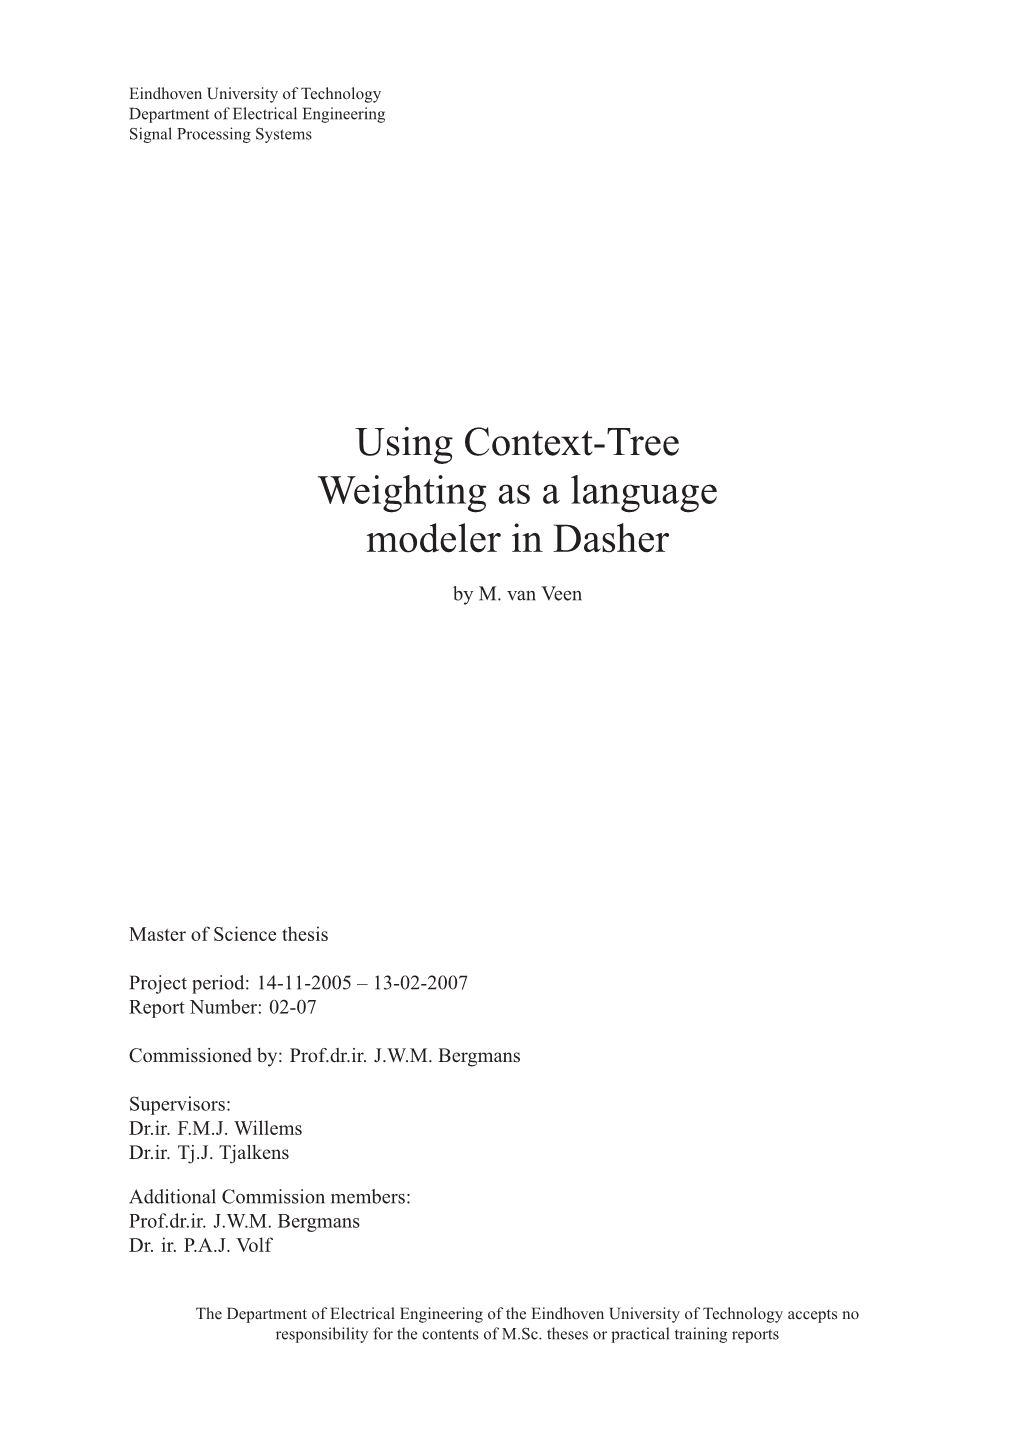 Using Context-Tree Weighting As a Language Modeler in Dasher